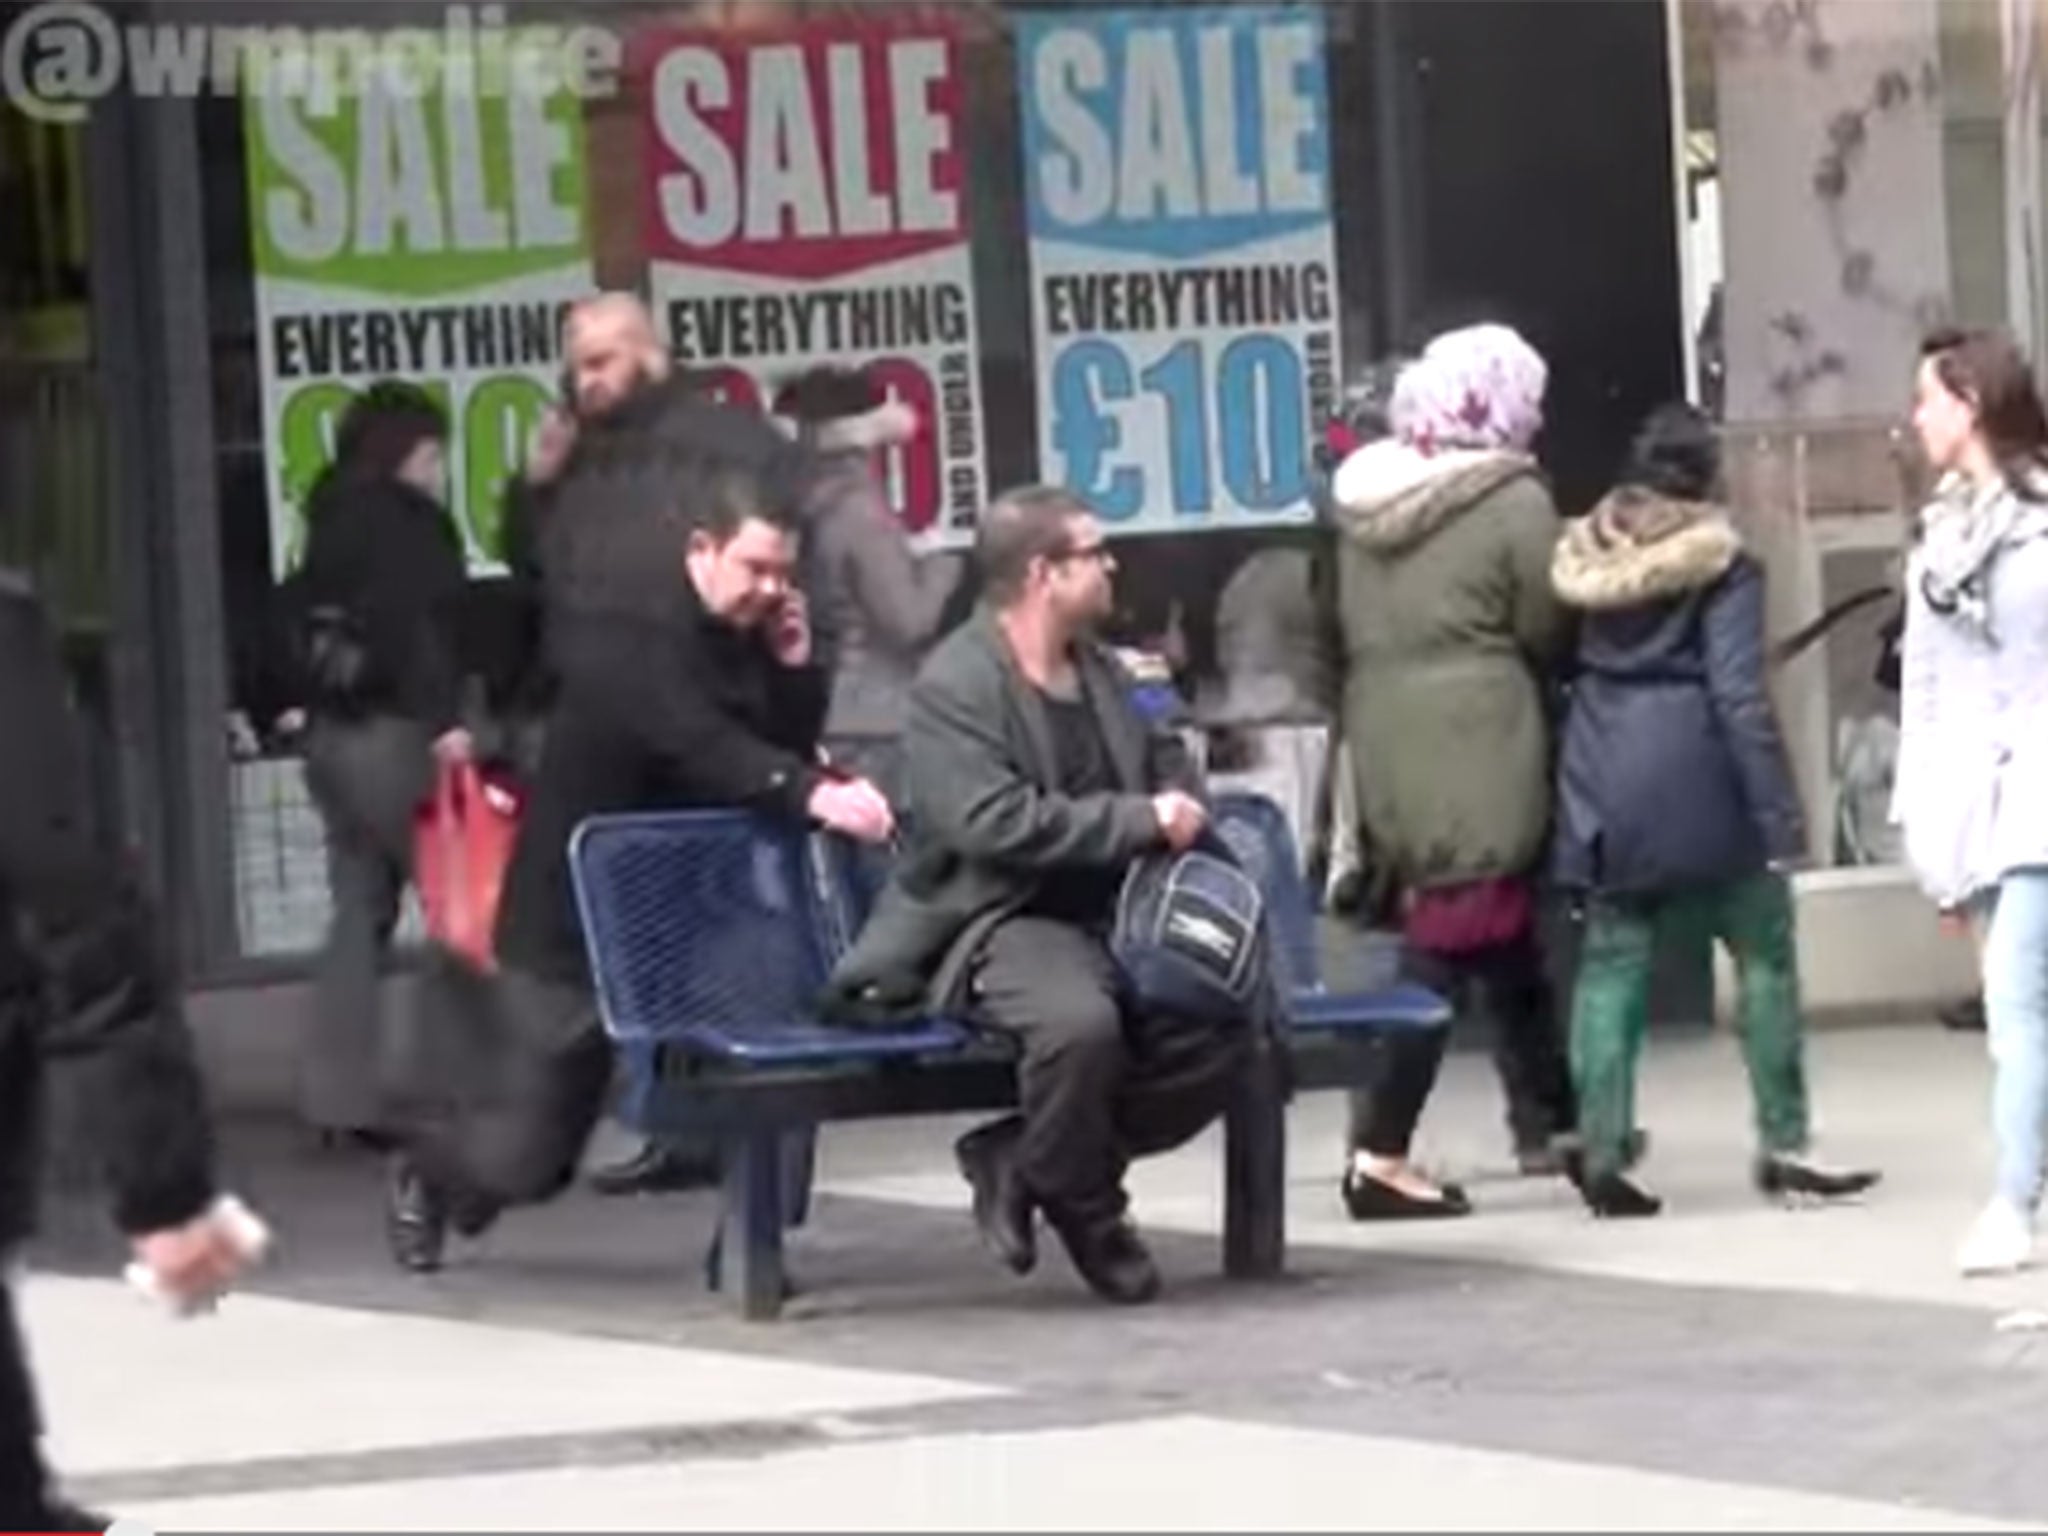 Man is pickpocketed by magicians as he sits on bench